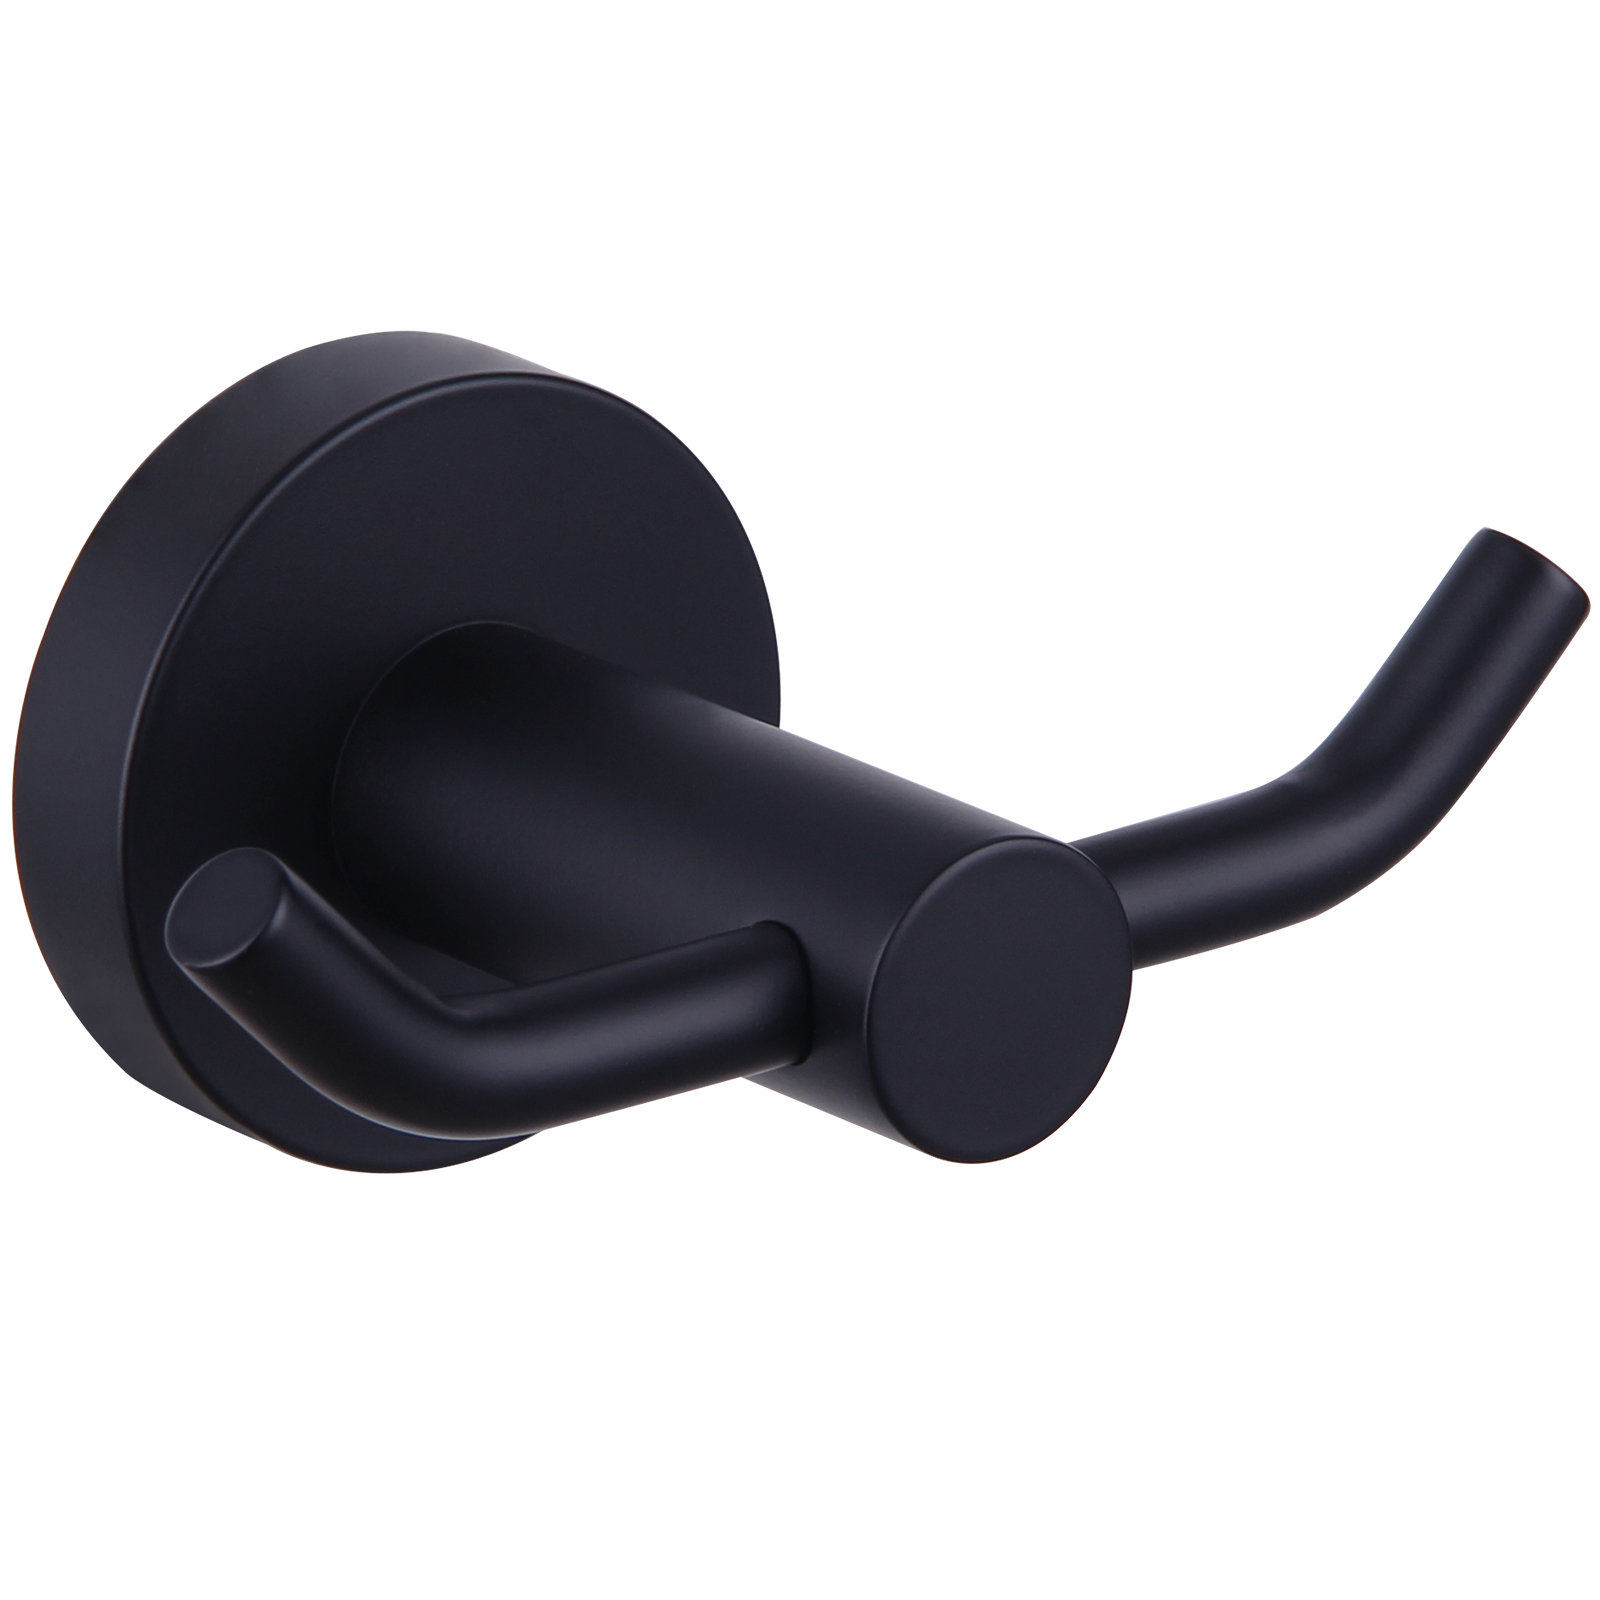 AngleSimple Stainless Steel Wall Robe Hook